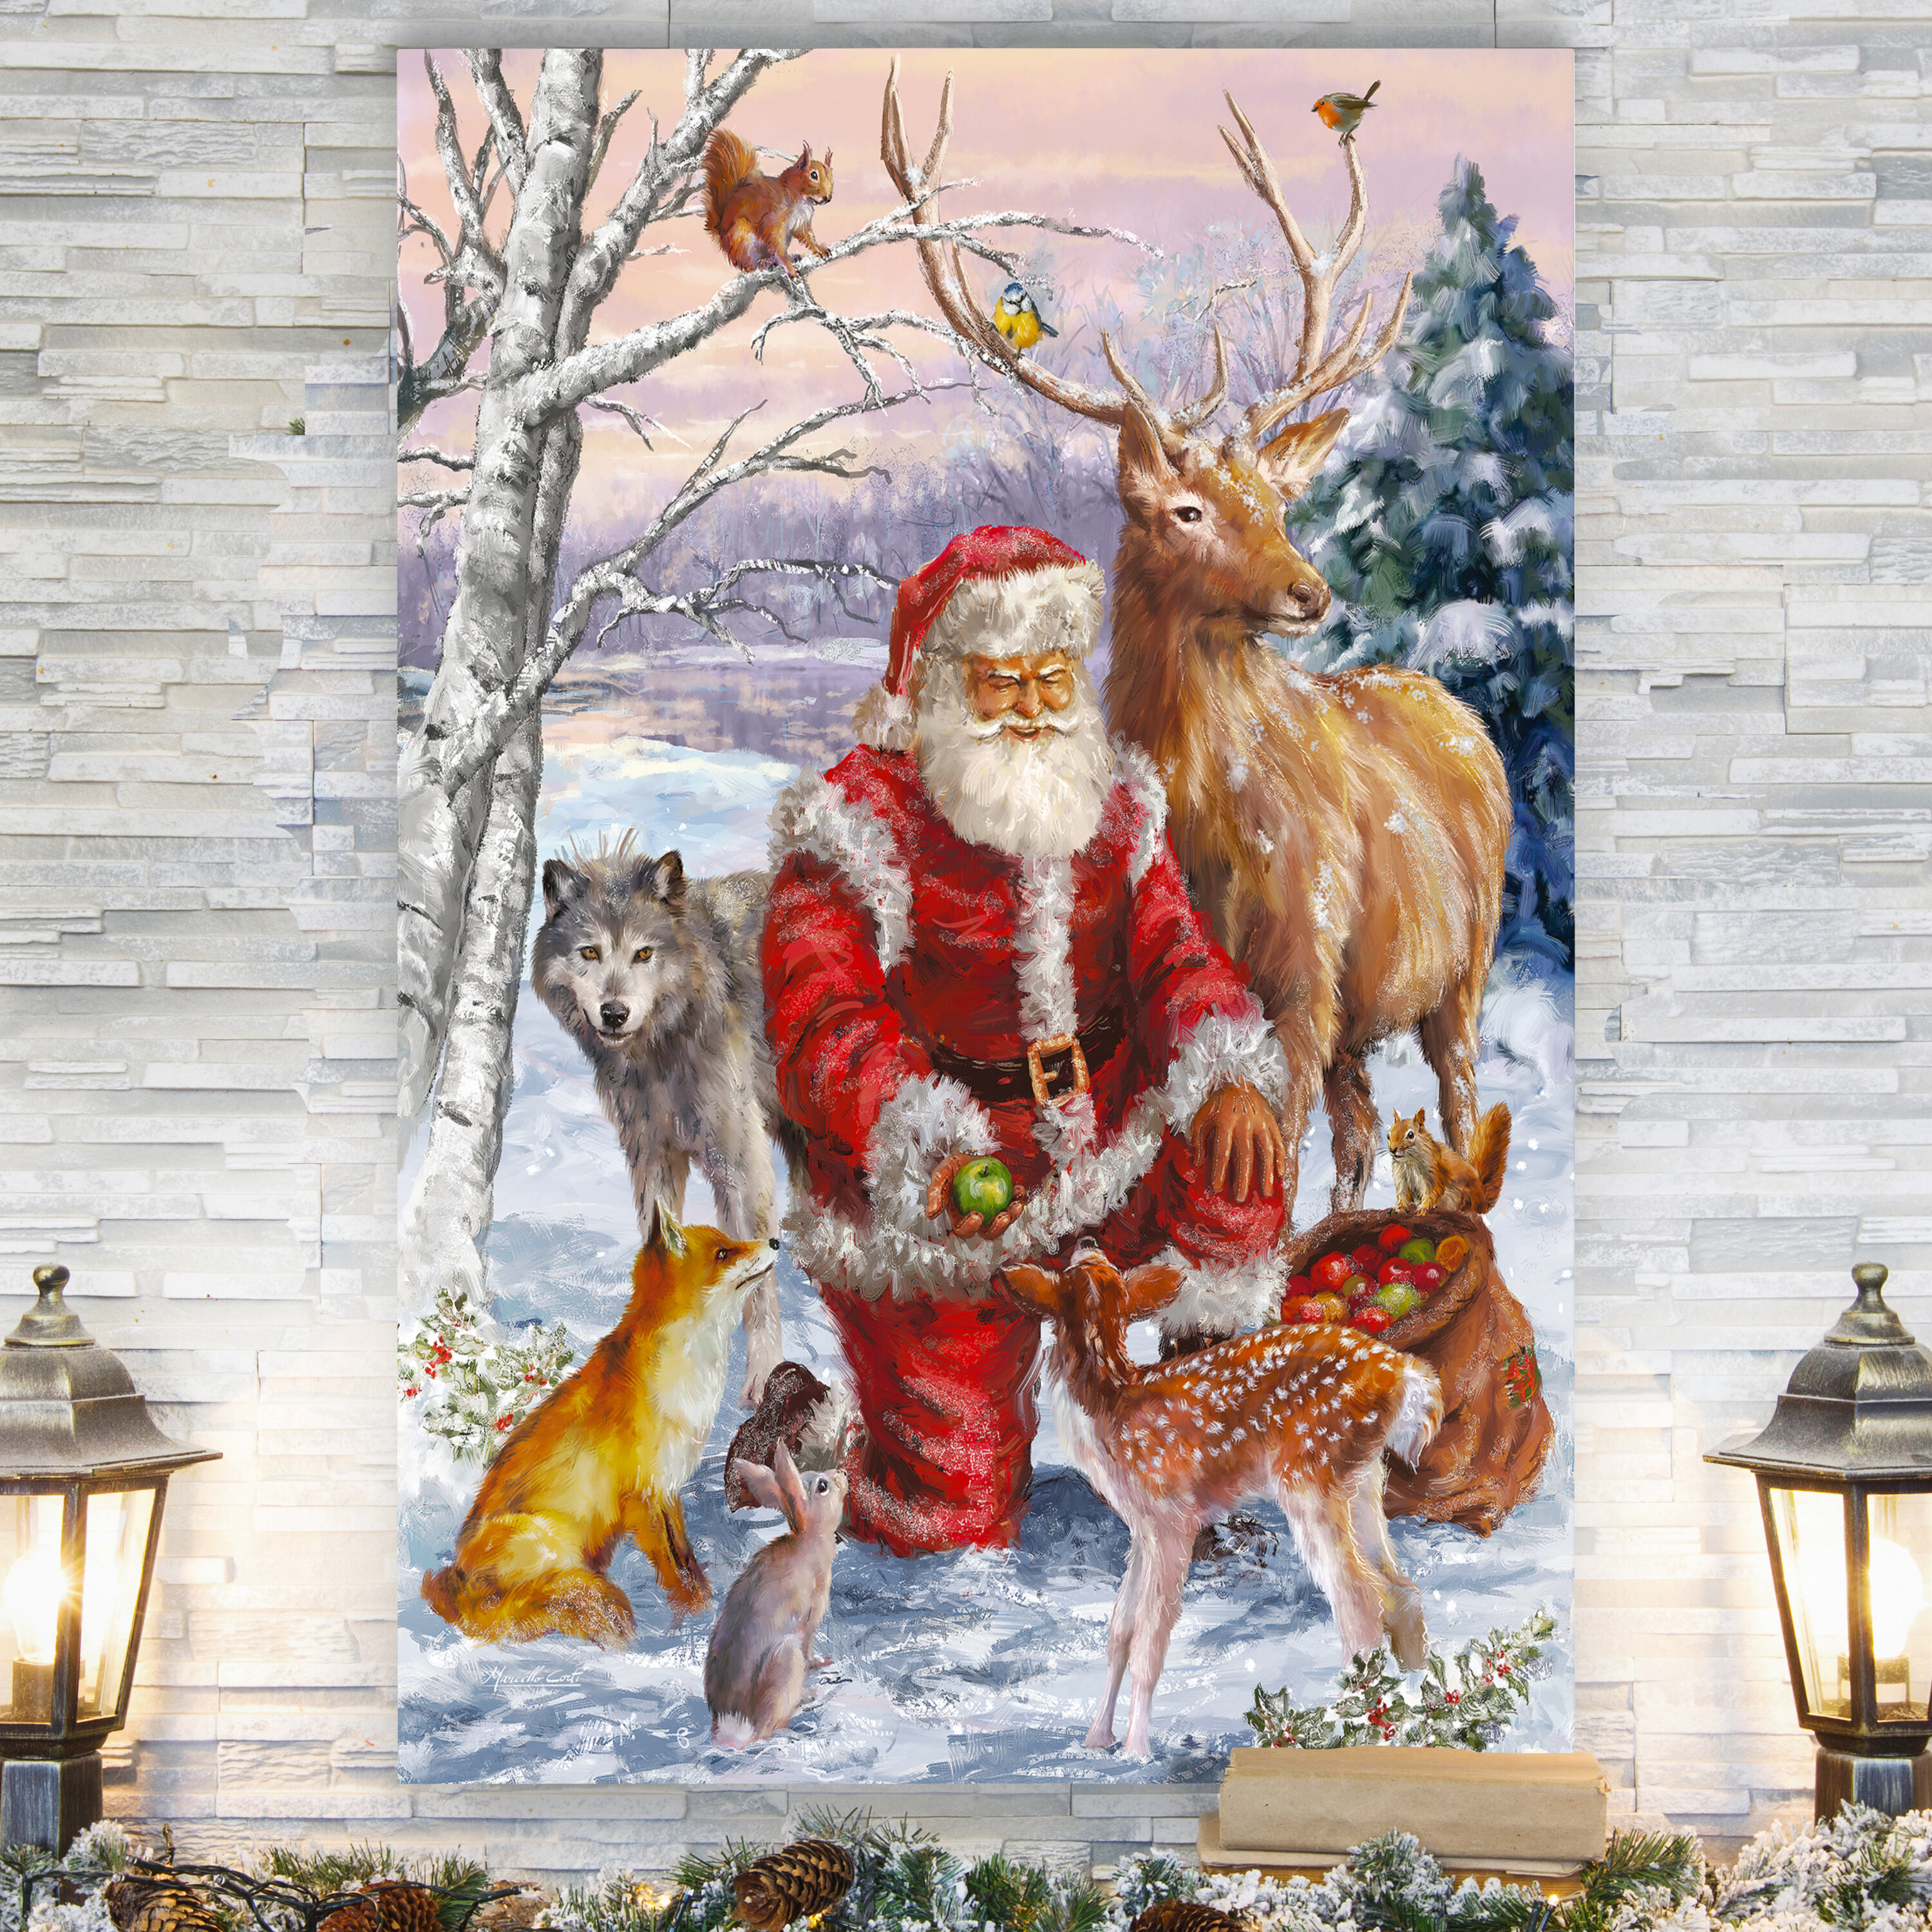 Holiday - Christmas Reindeer by Susan Pepe - Wrapped Canvas Painting Print The Holiday Aisle Size: 40 H x 30 W x 1.5 D